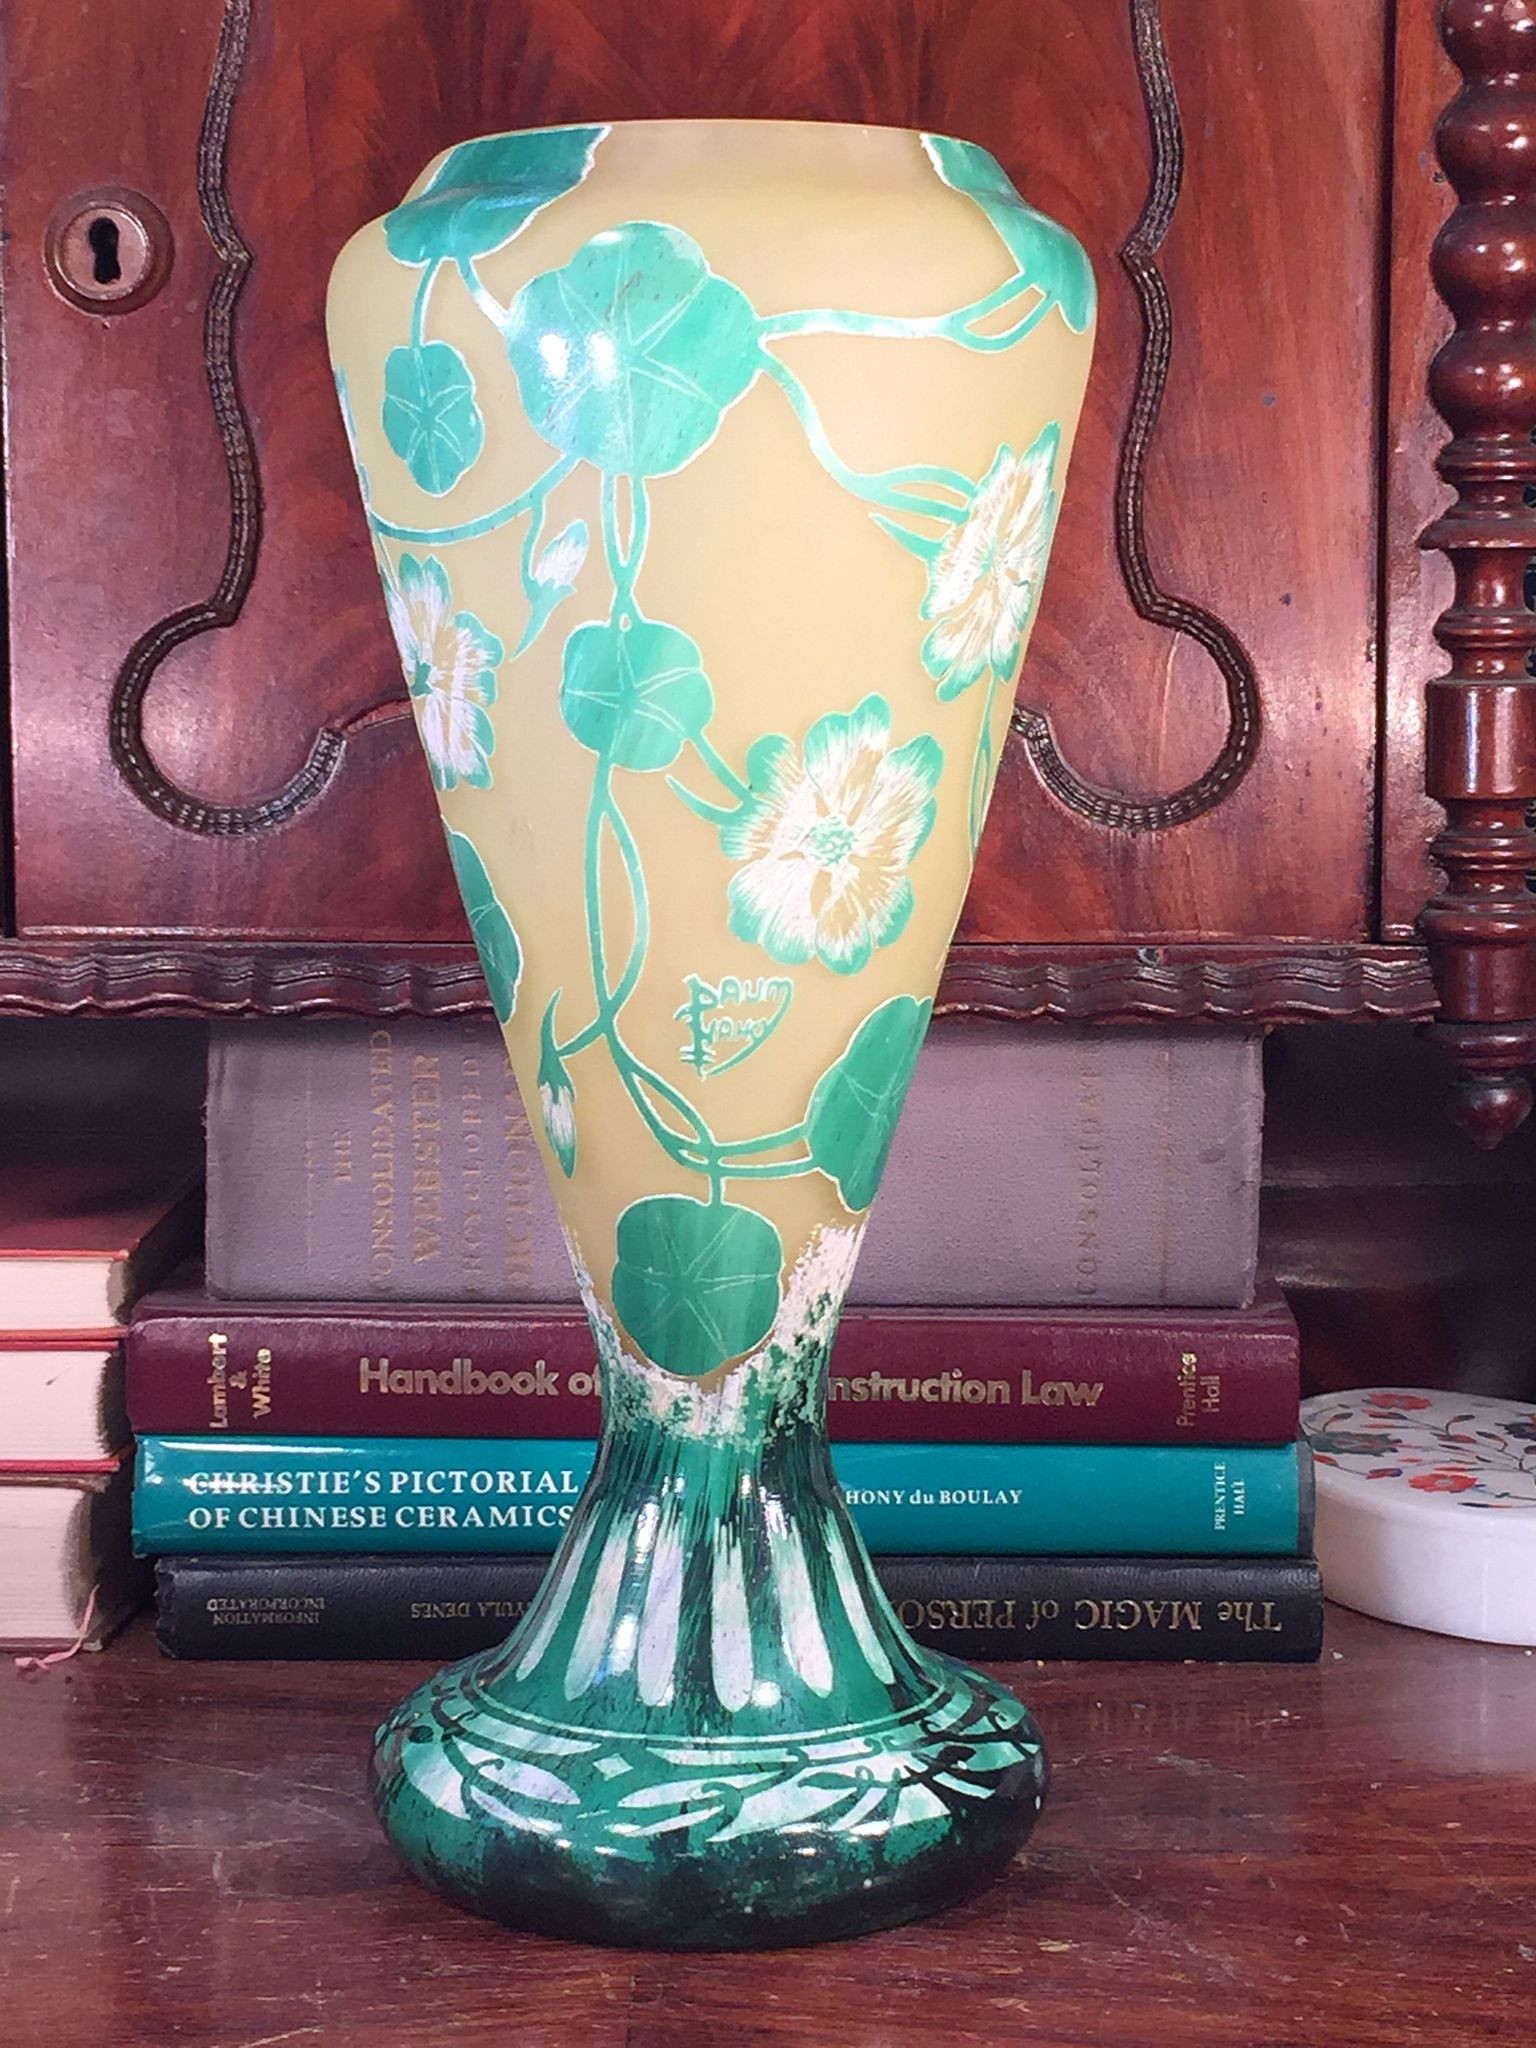 6 Inch Crystal Vase Of Lovely Art Nouveau Style Glass Cameo Mould Blown European Handcraft Throughout Lovely Art Nouveau Style Glass Cameo Mould Blown European Handcraft Vase with Yellow Ground Color